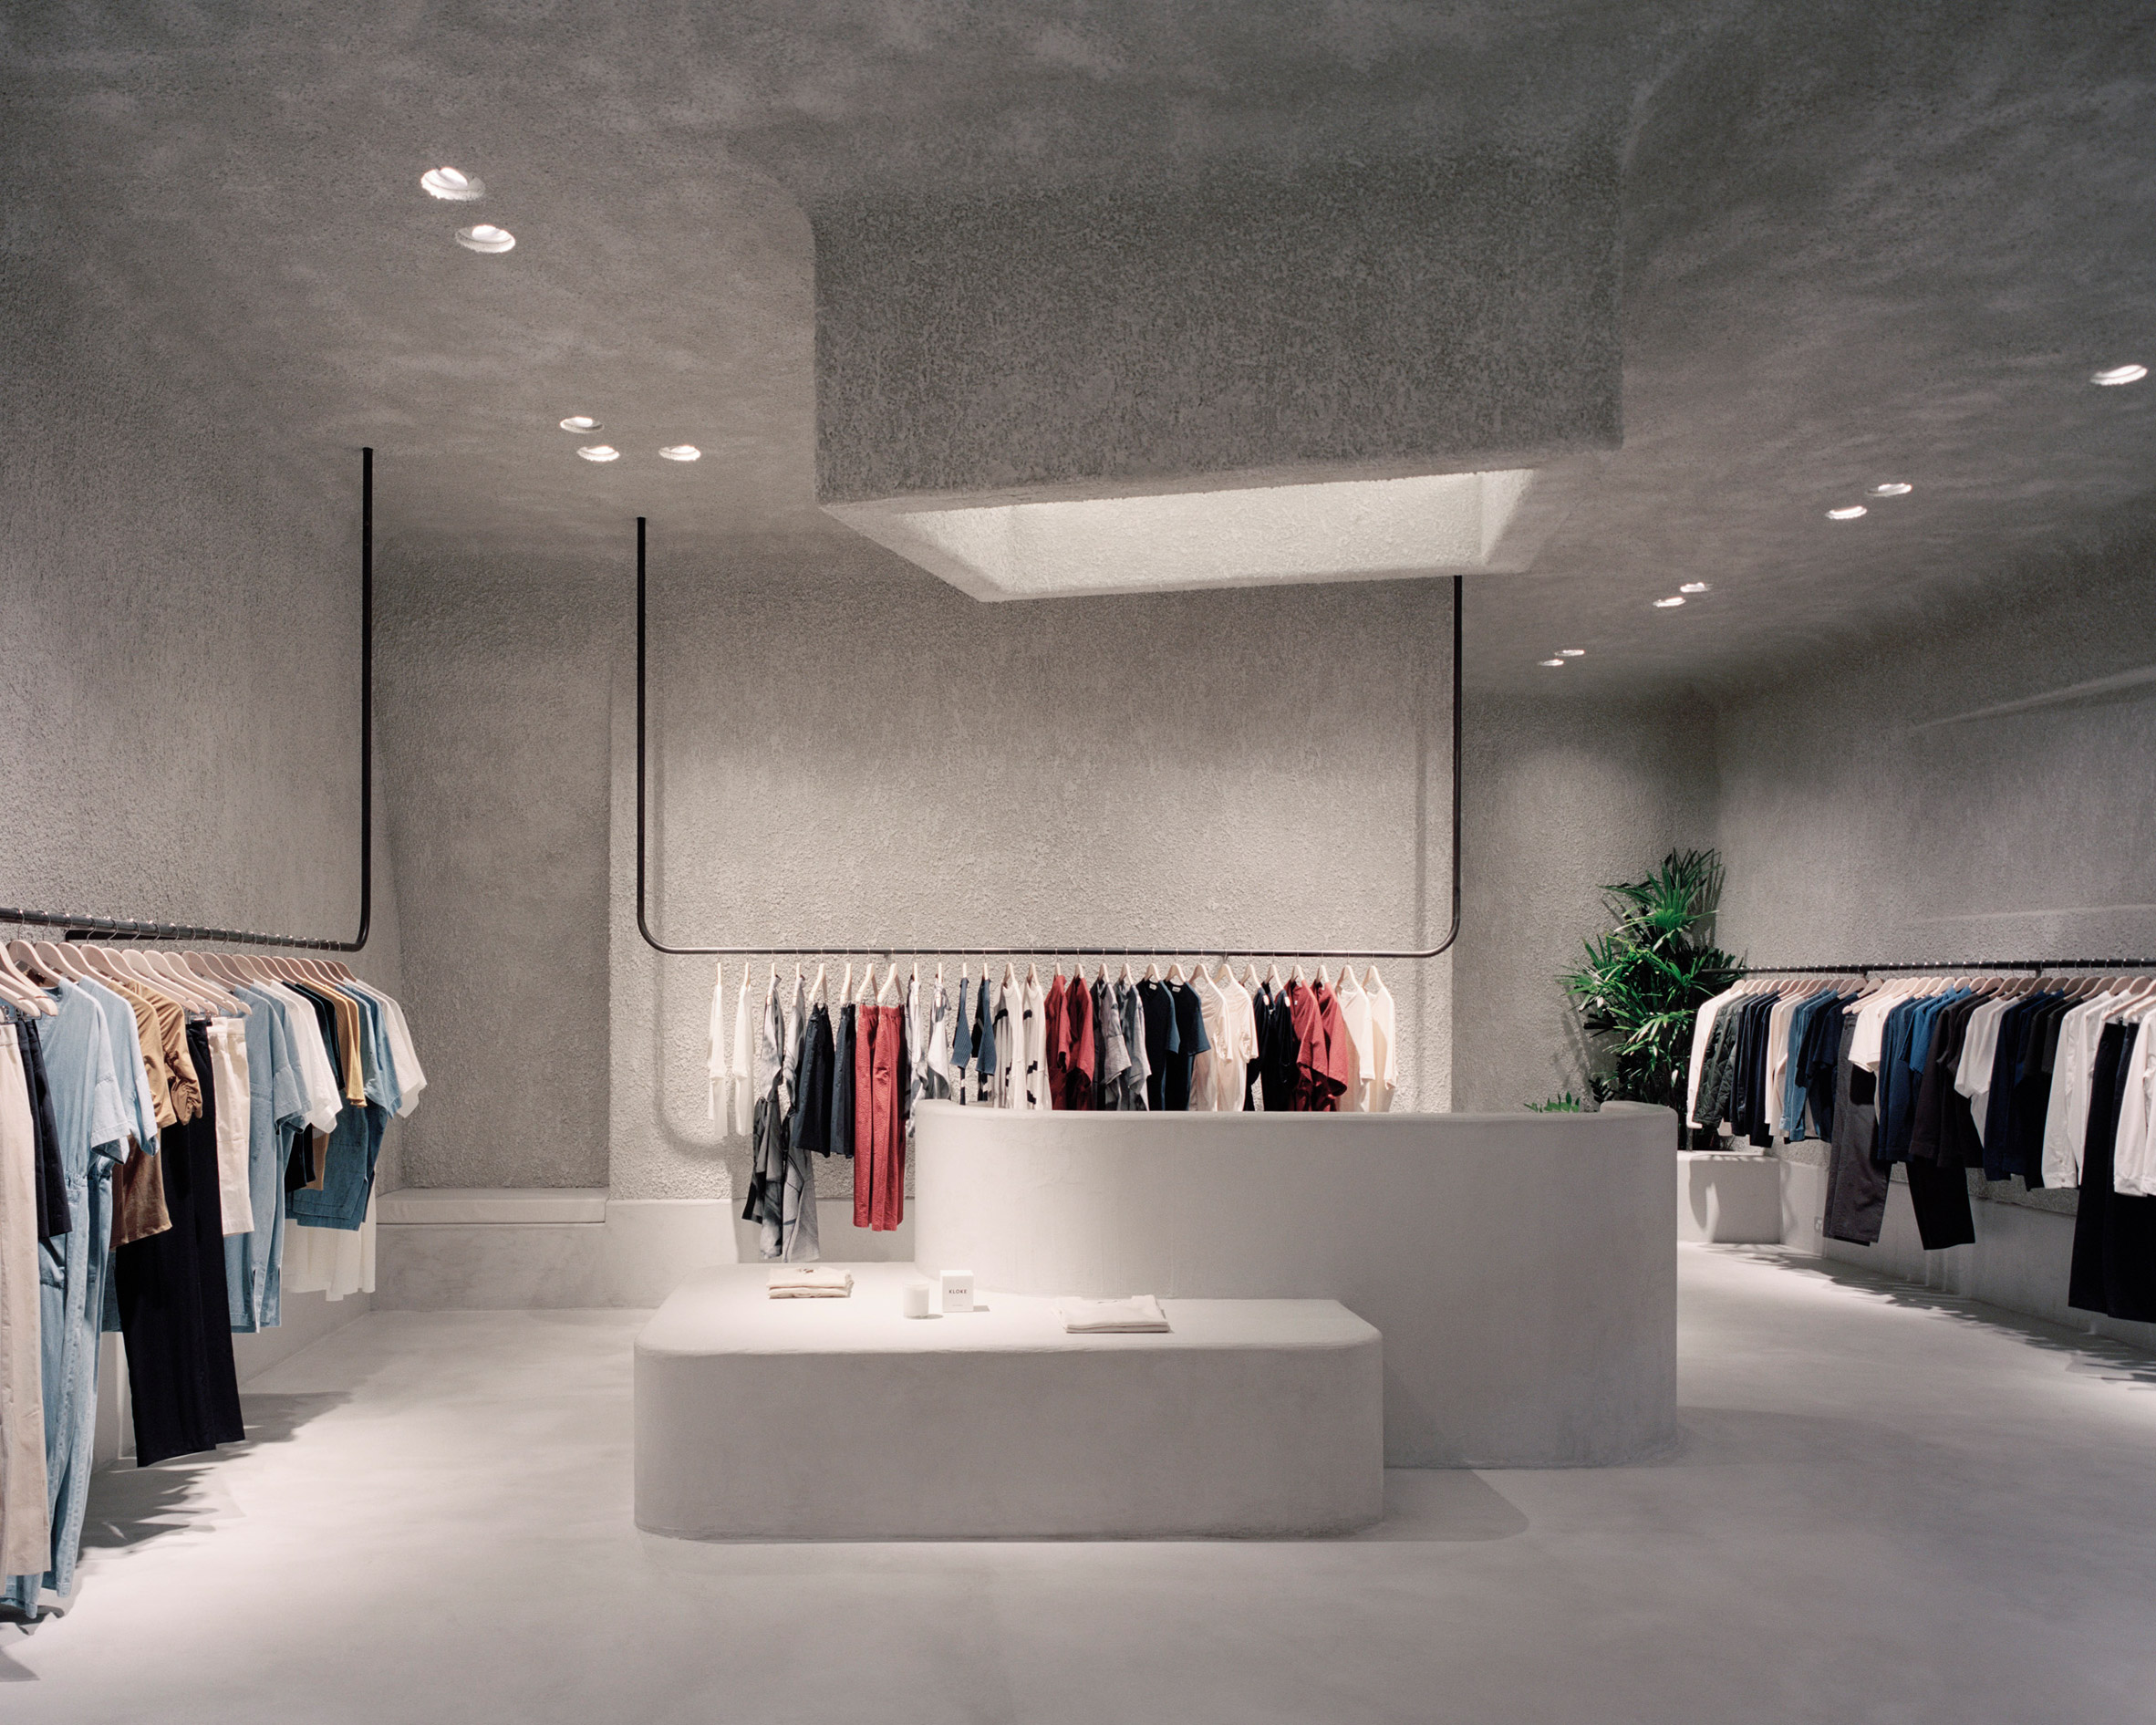 Studio Goss takes cues from brutalism for Melbourne clothing store-9